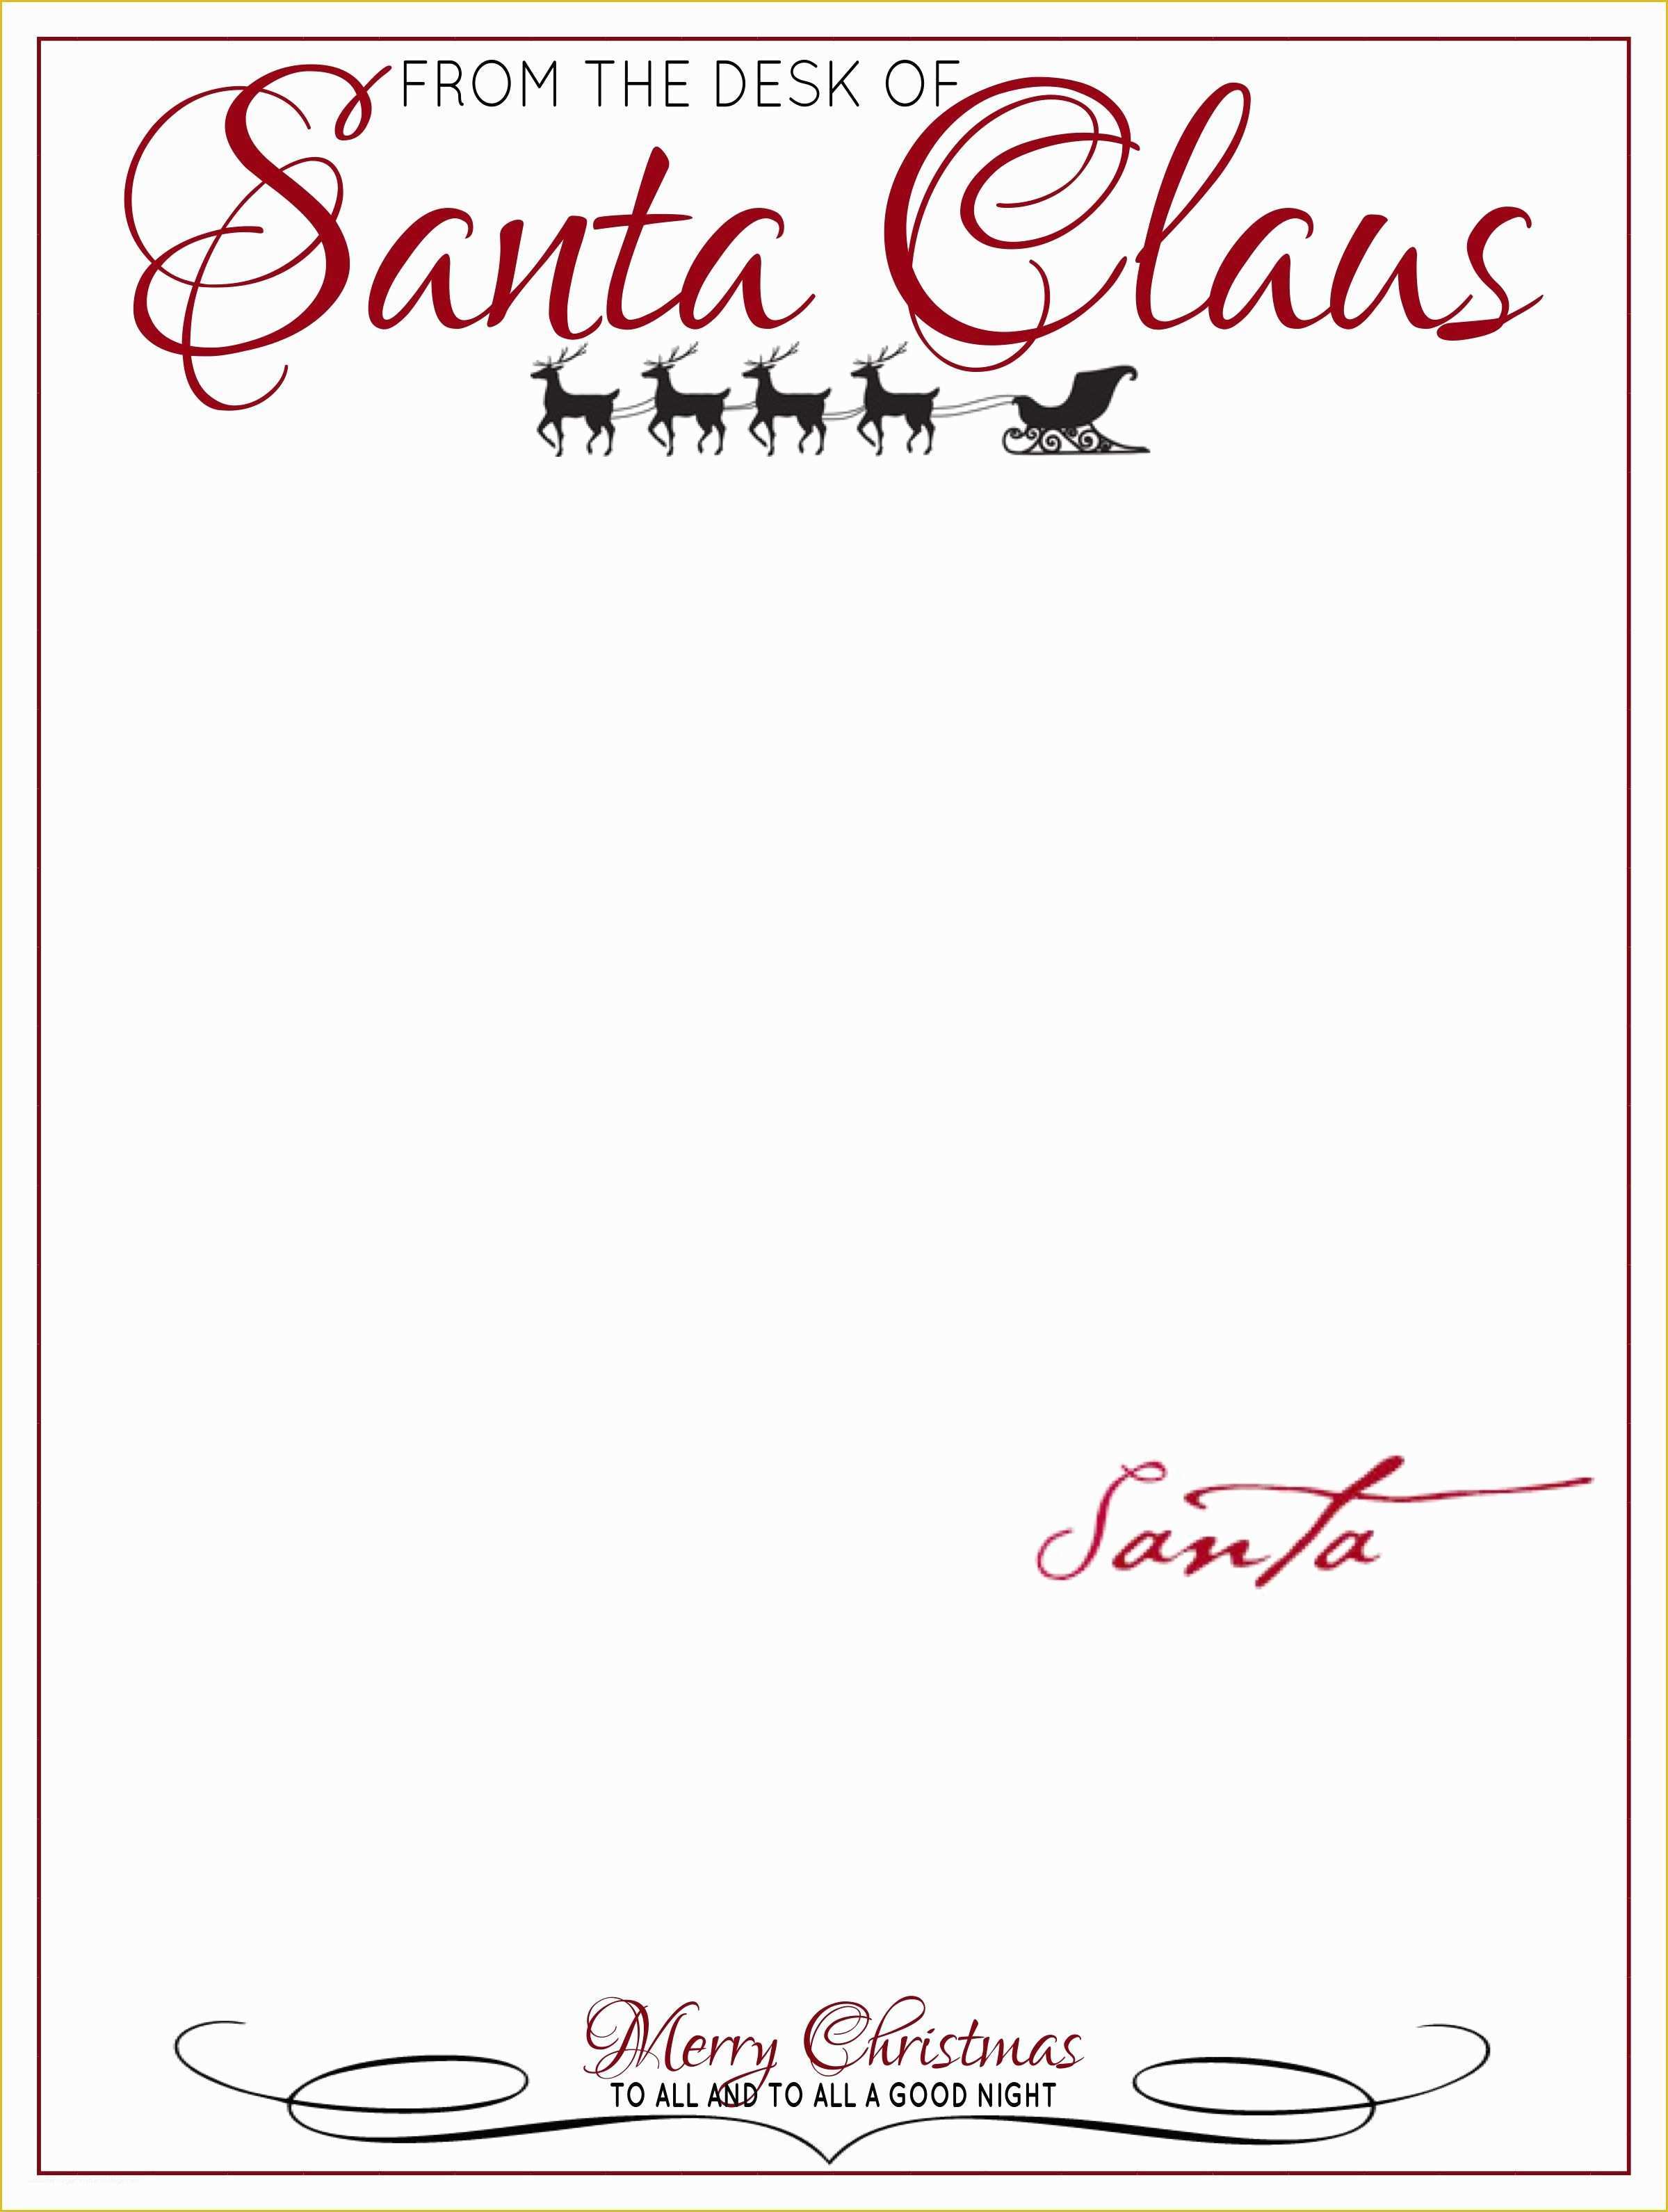 Free Letter From Santa Template Word Of the Desk Of Letter Head From Santa Claus